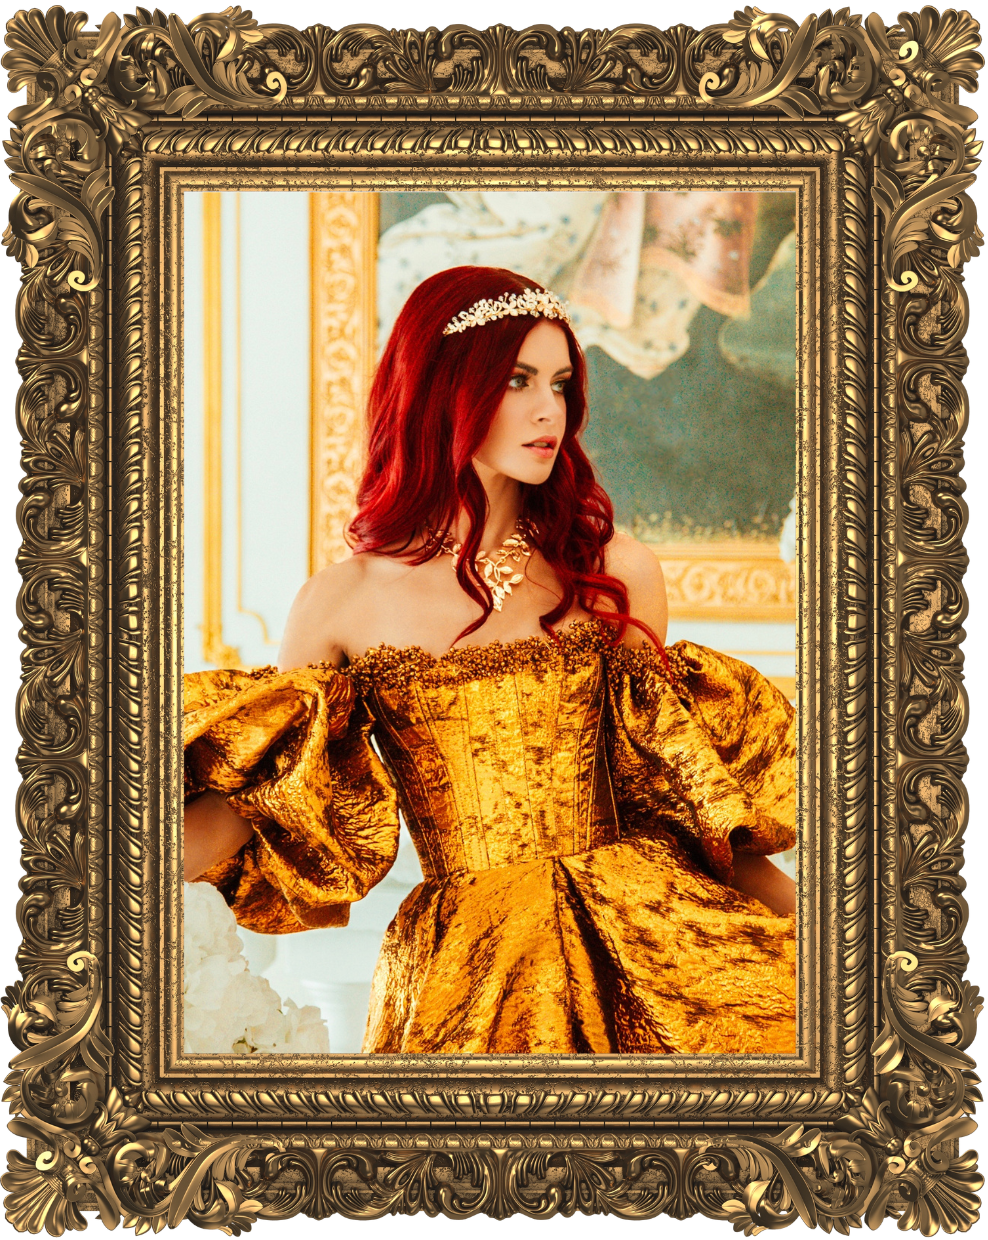 Portrait of a red haired princess in a gold dress in front of an ornate painting inside a gold frame at a fantasy event